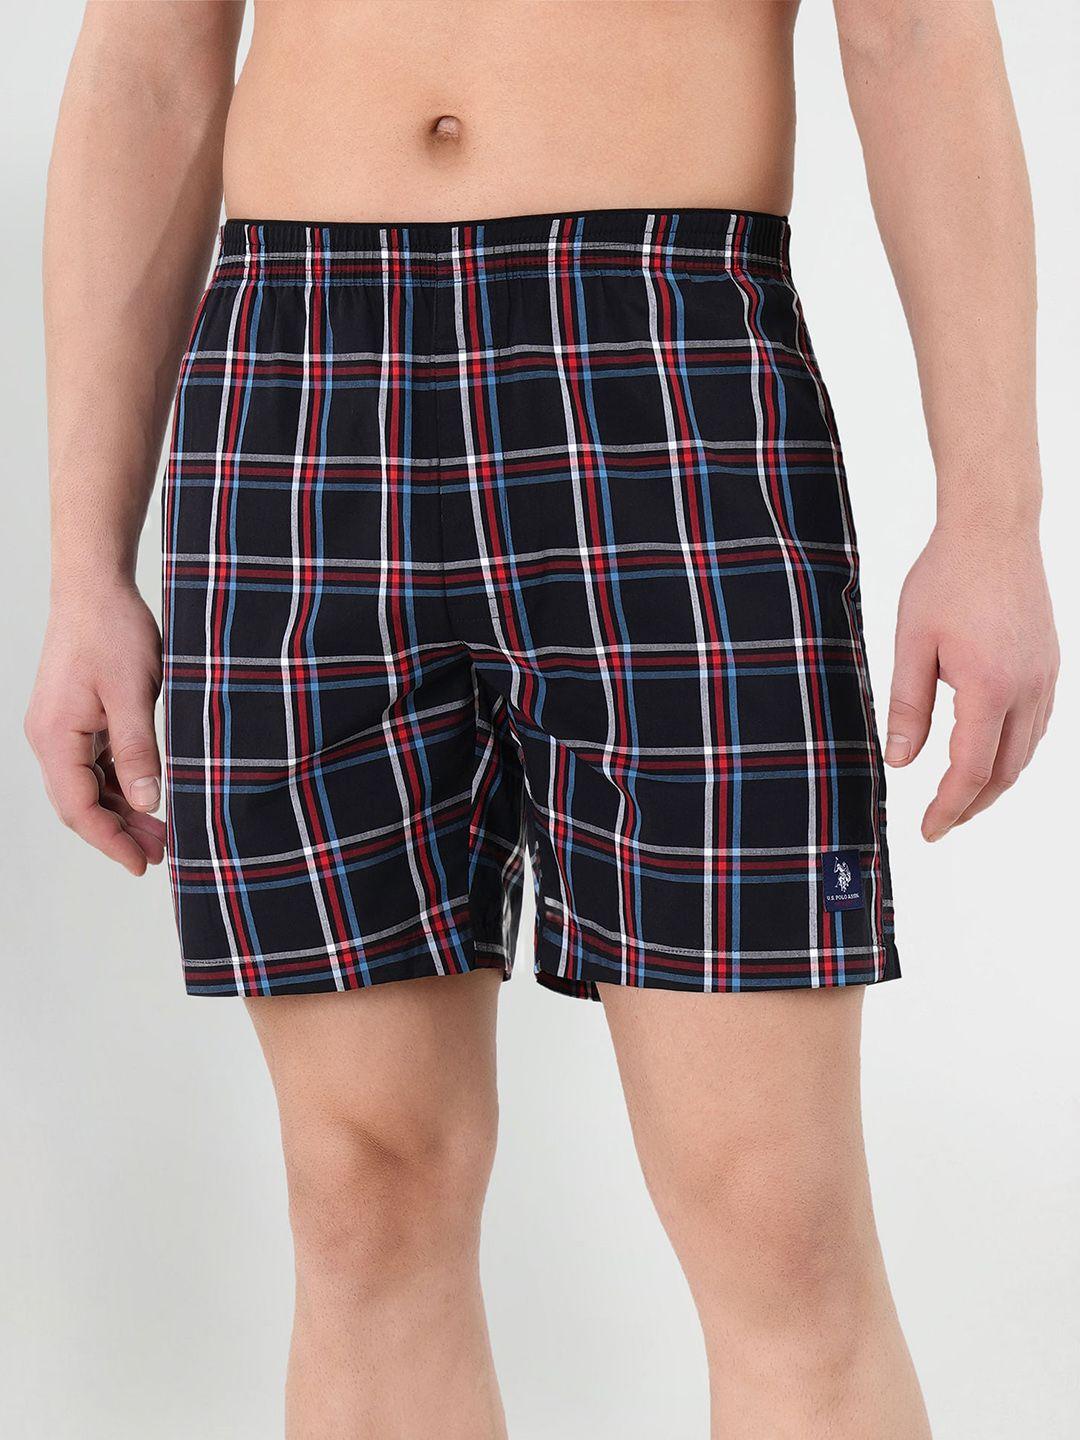 u.s. polo assn. checked cotton twill boxers ex001-bw4-ch